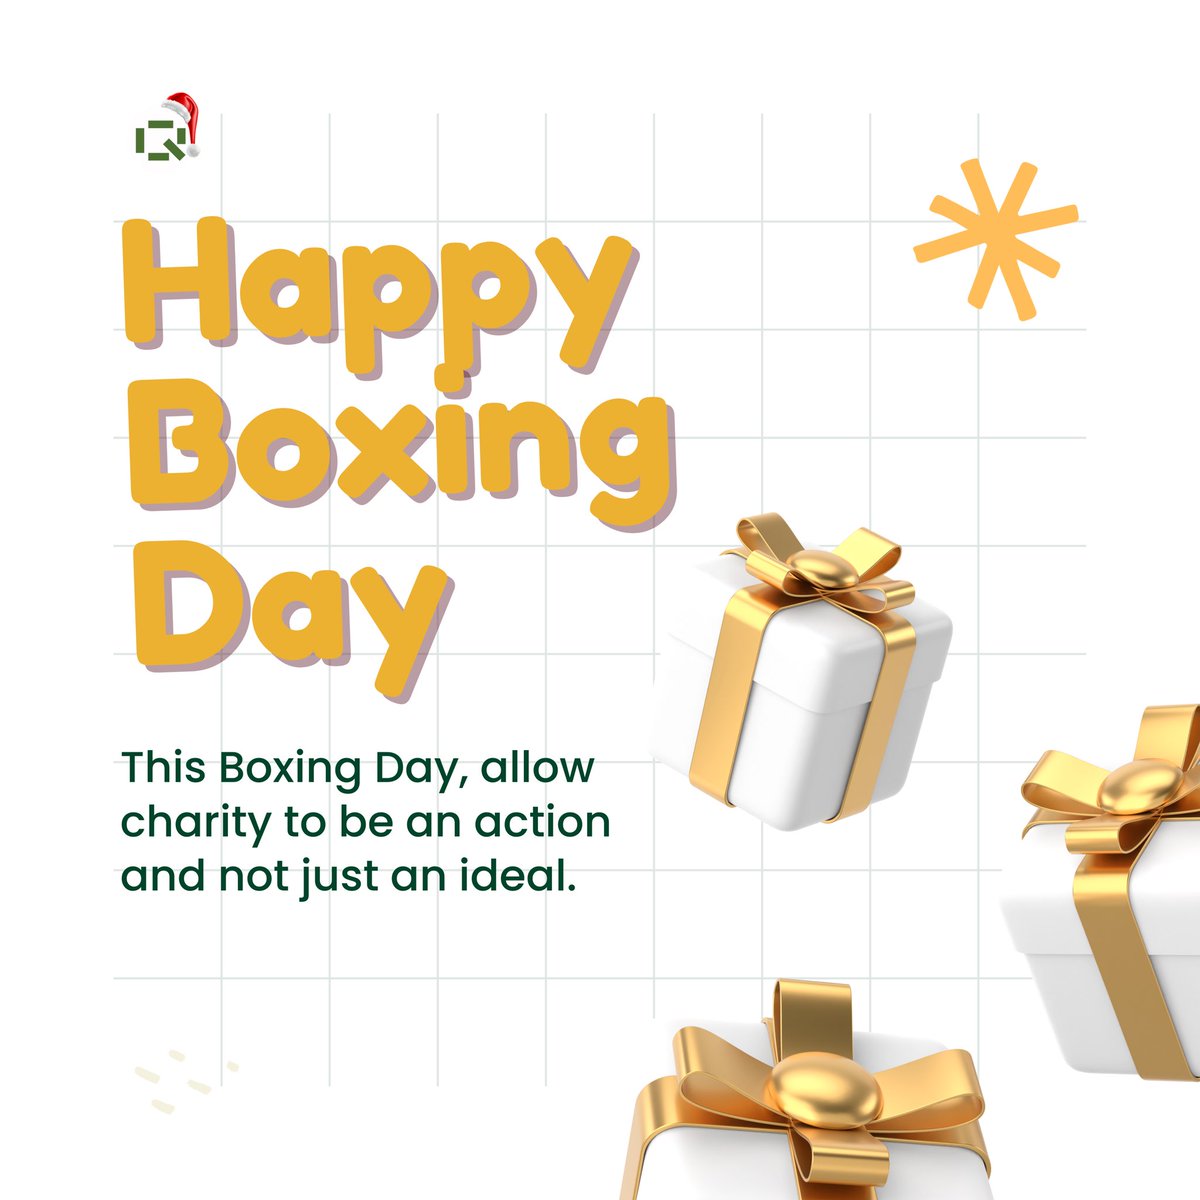 Unwrap the joy of Boxing Day! 🎁🌟 May this day be filled with relaxation, laughter, and the warmth of post-Christmas celebrations.

Happy Boxing Day! 🎉

#BoxingDayJoy
#HolidayCheer